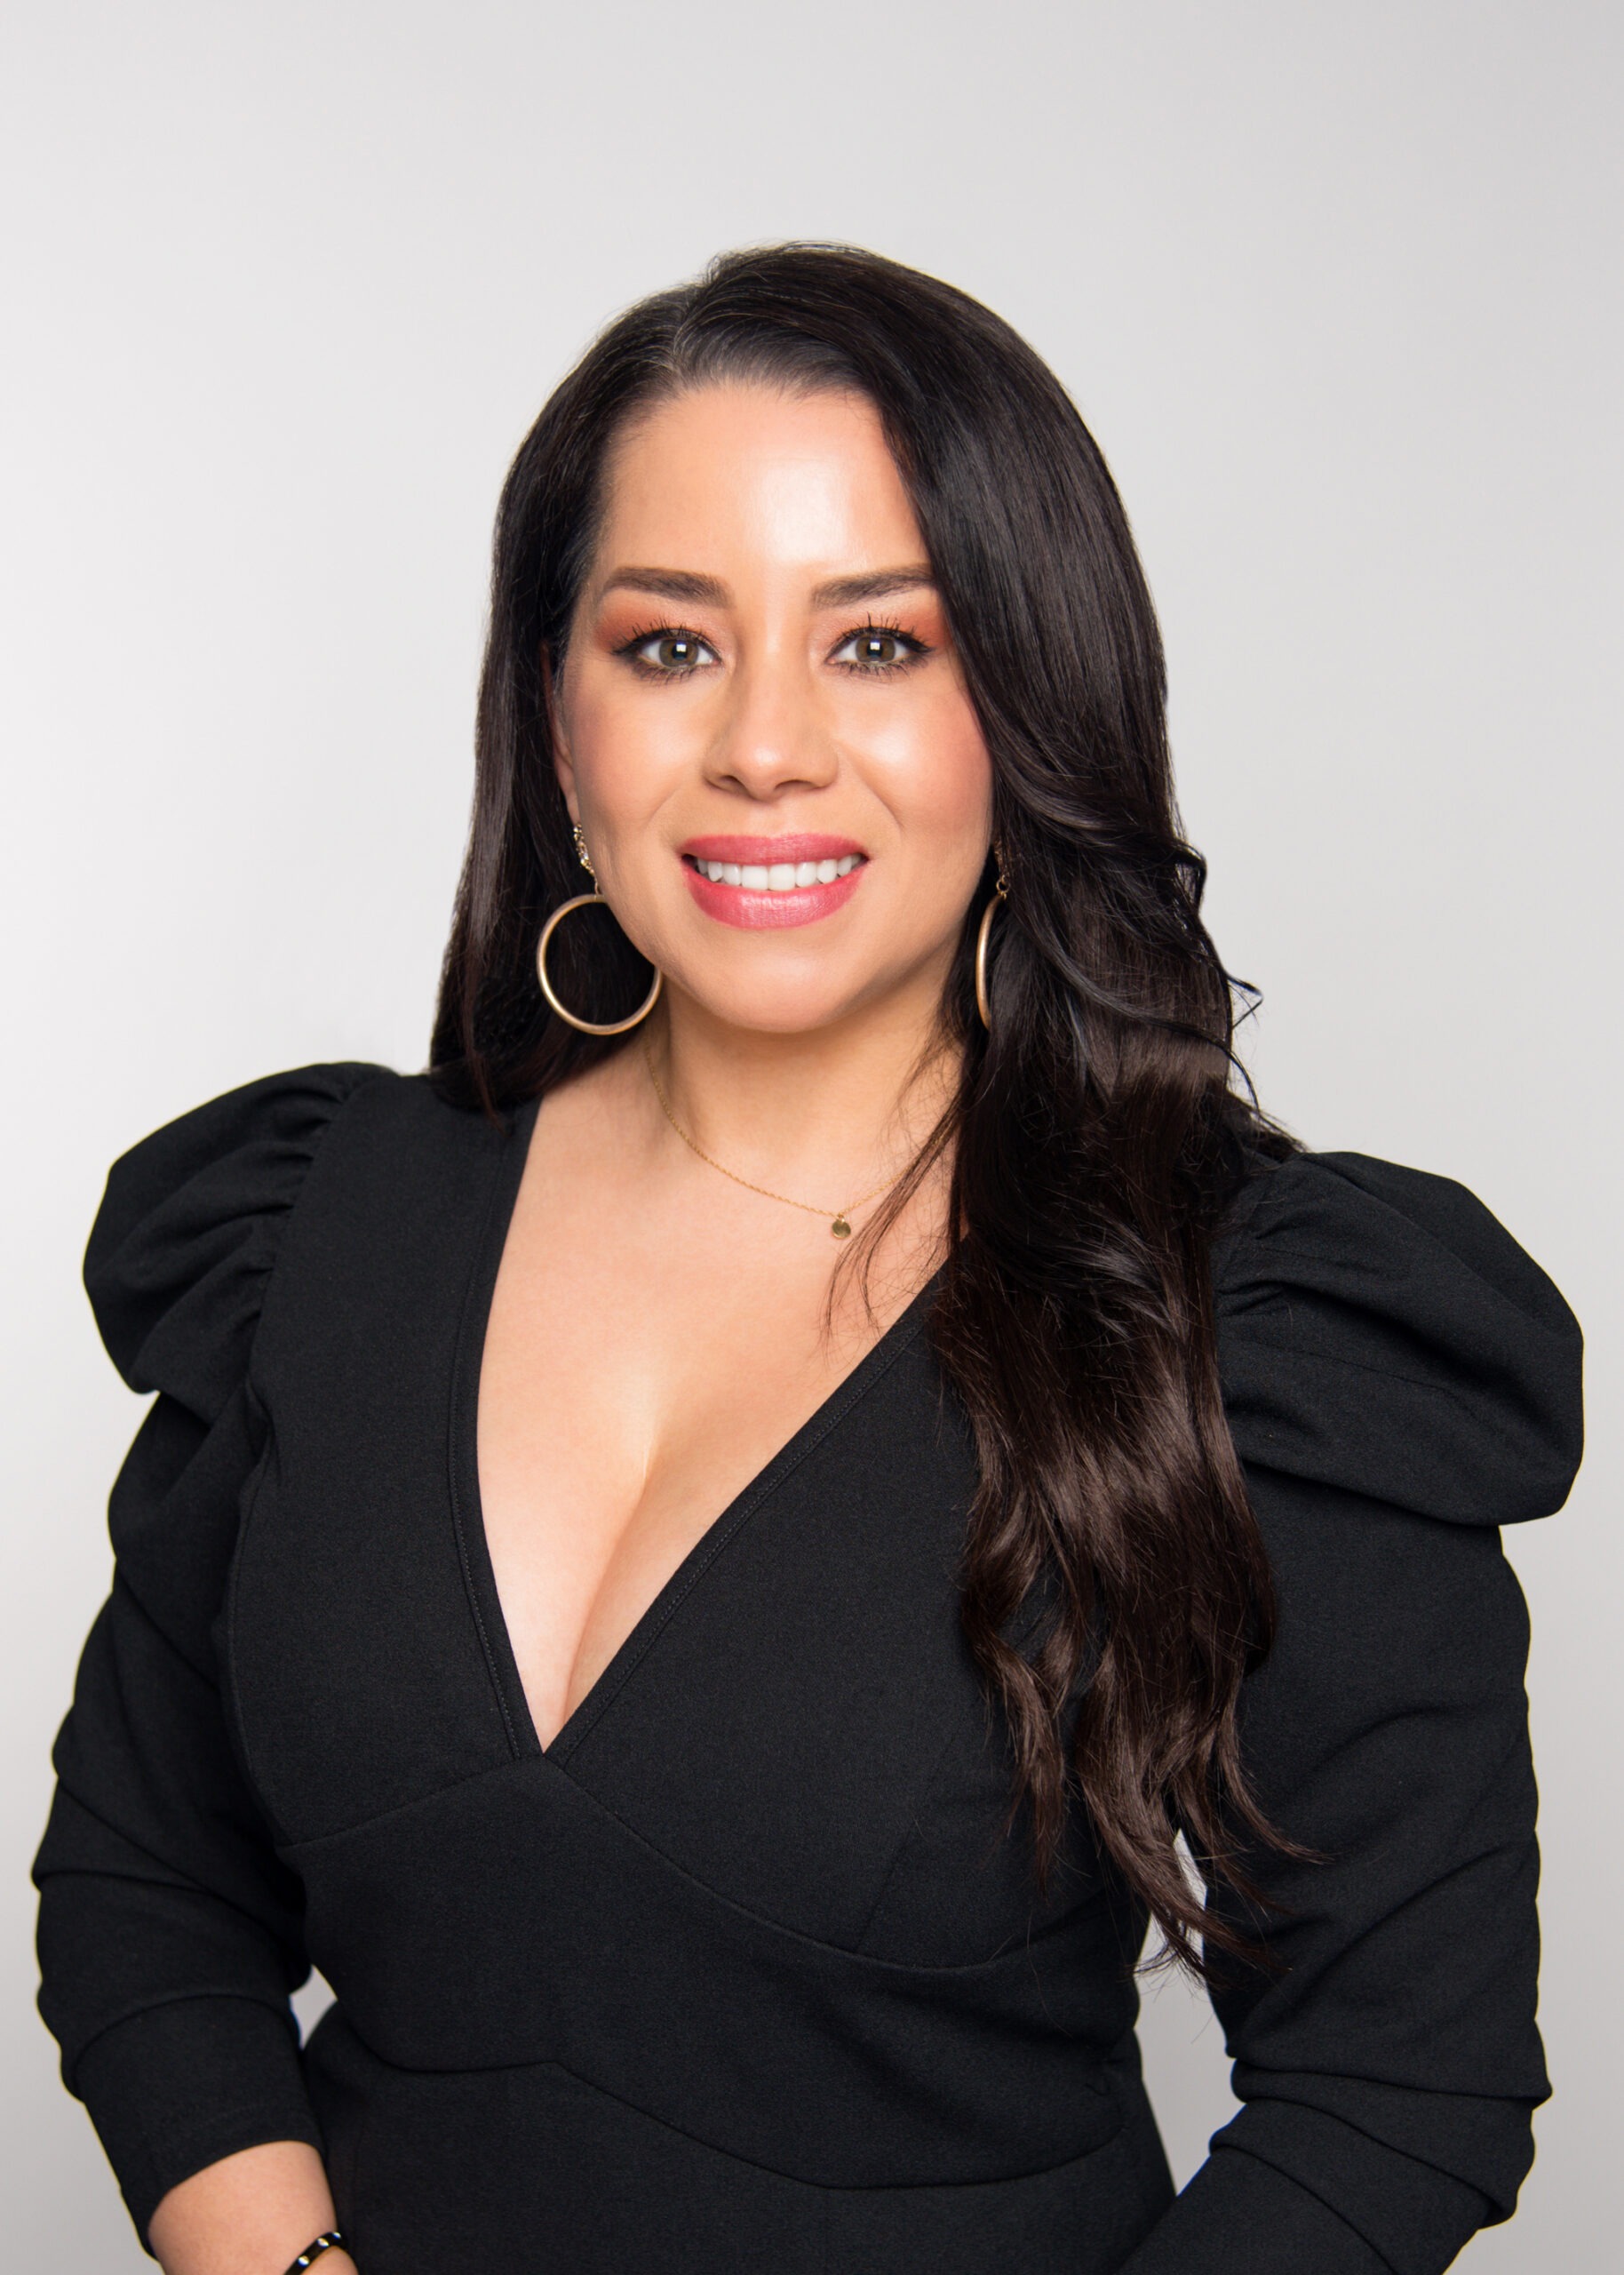 Vicky Arevalo, Patient Coordinator at Luna Plastic Surgery in Johns Creek, Georgia.